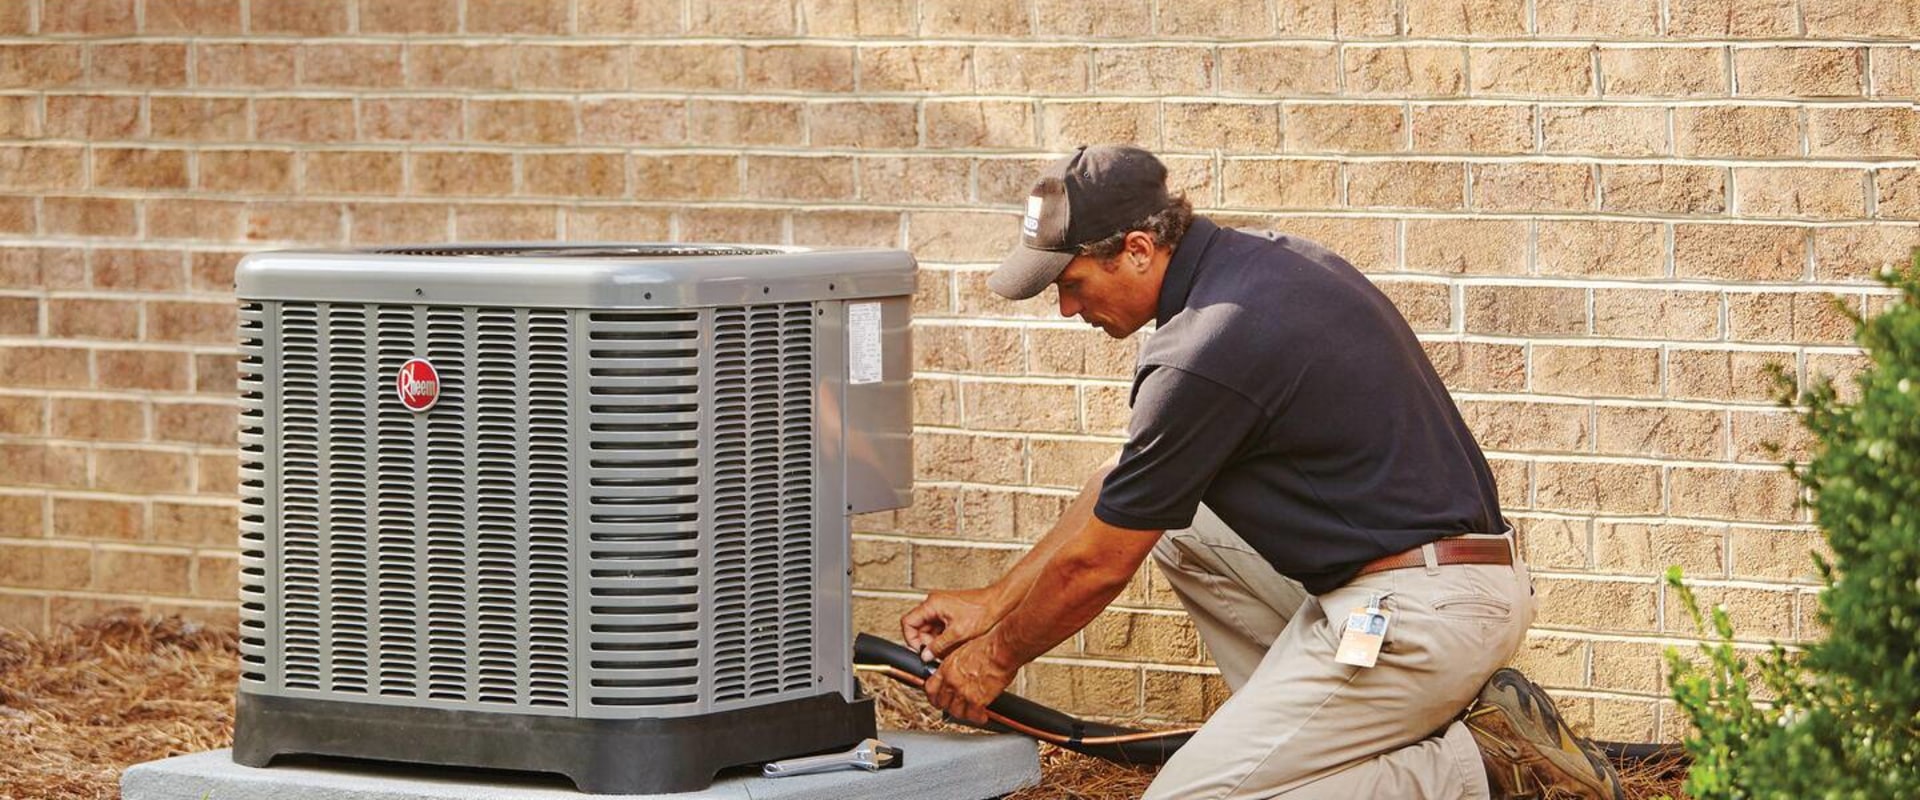 Transform Your Space: AC Ionizer Air Purifier Installation Services in Cooper City FL